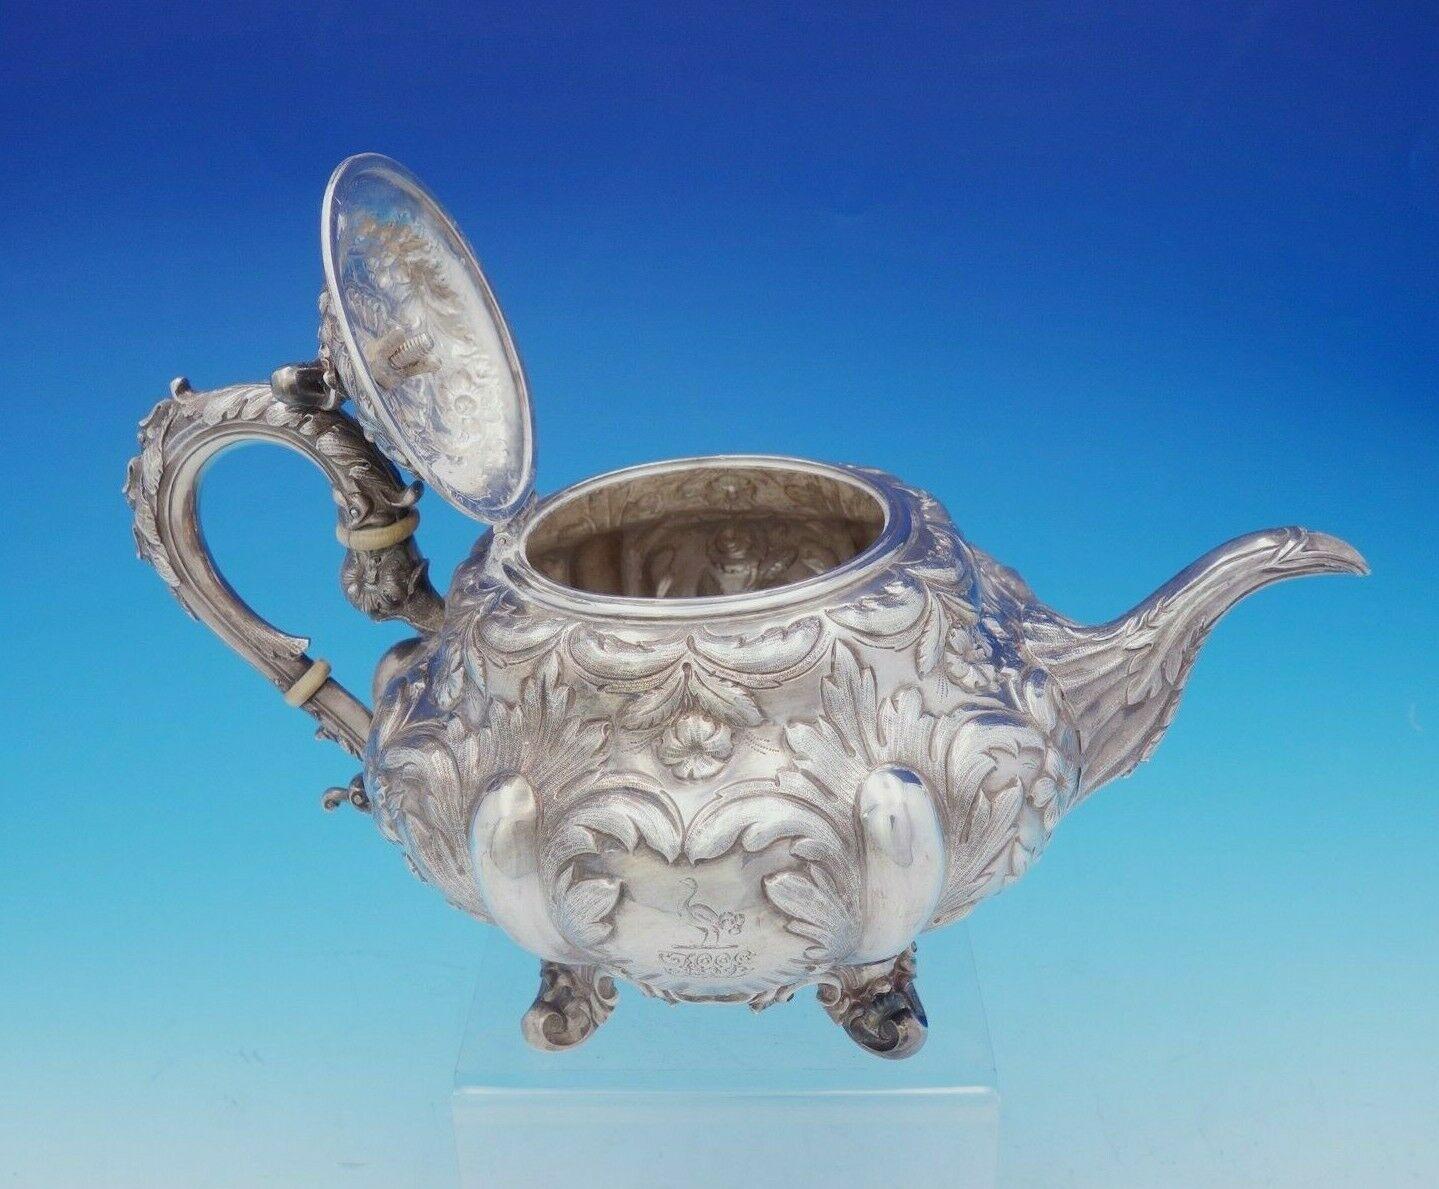 Francis David Dexter

Exceptional Francis David Dexter English Victorian sterling silver 3-piece tea set hand chased with intricate floral design. The tea pot has a 3-D cast leaf and acorn finial. The pieces have applied cast handles and cast